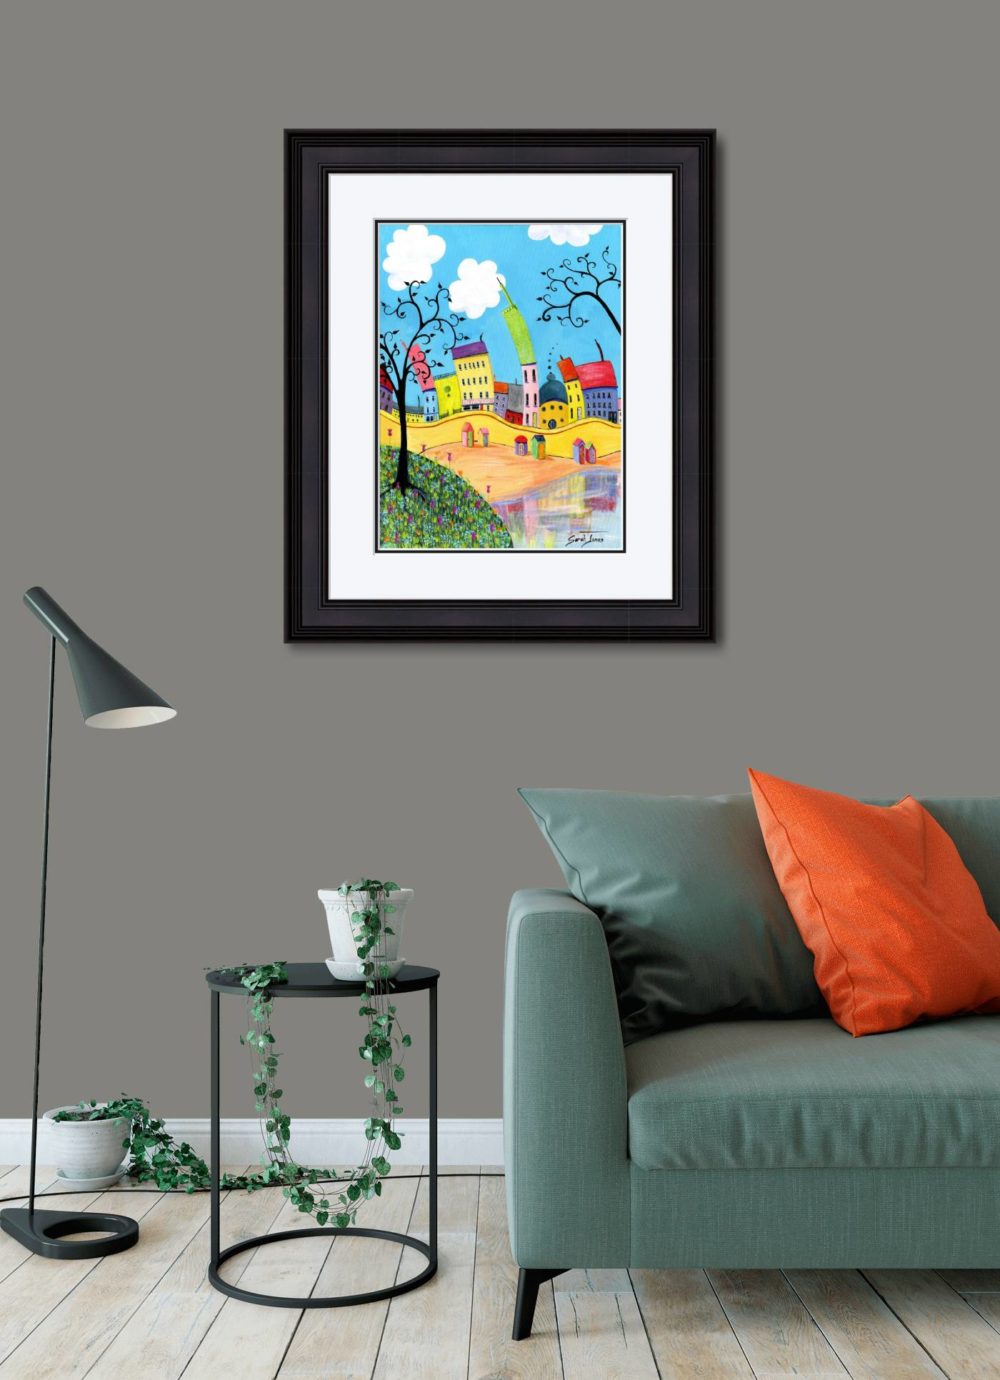 A House By The Sea Print In Black Frame In Room